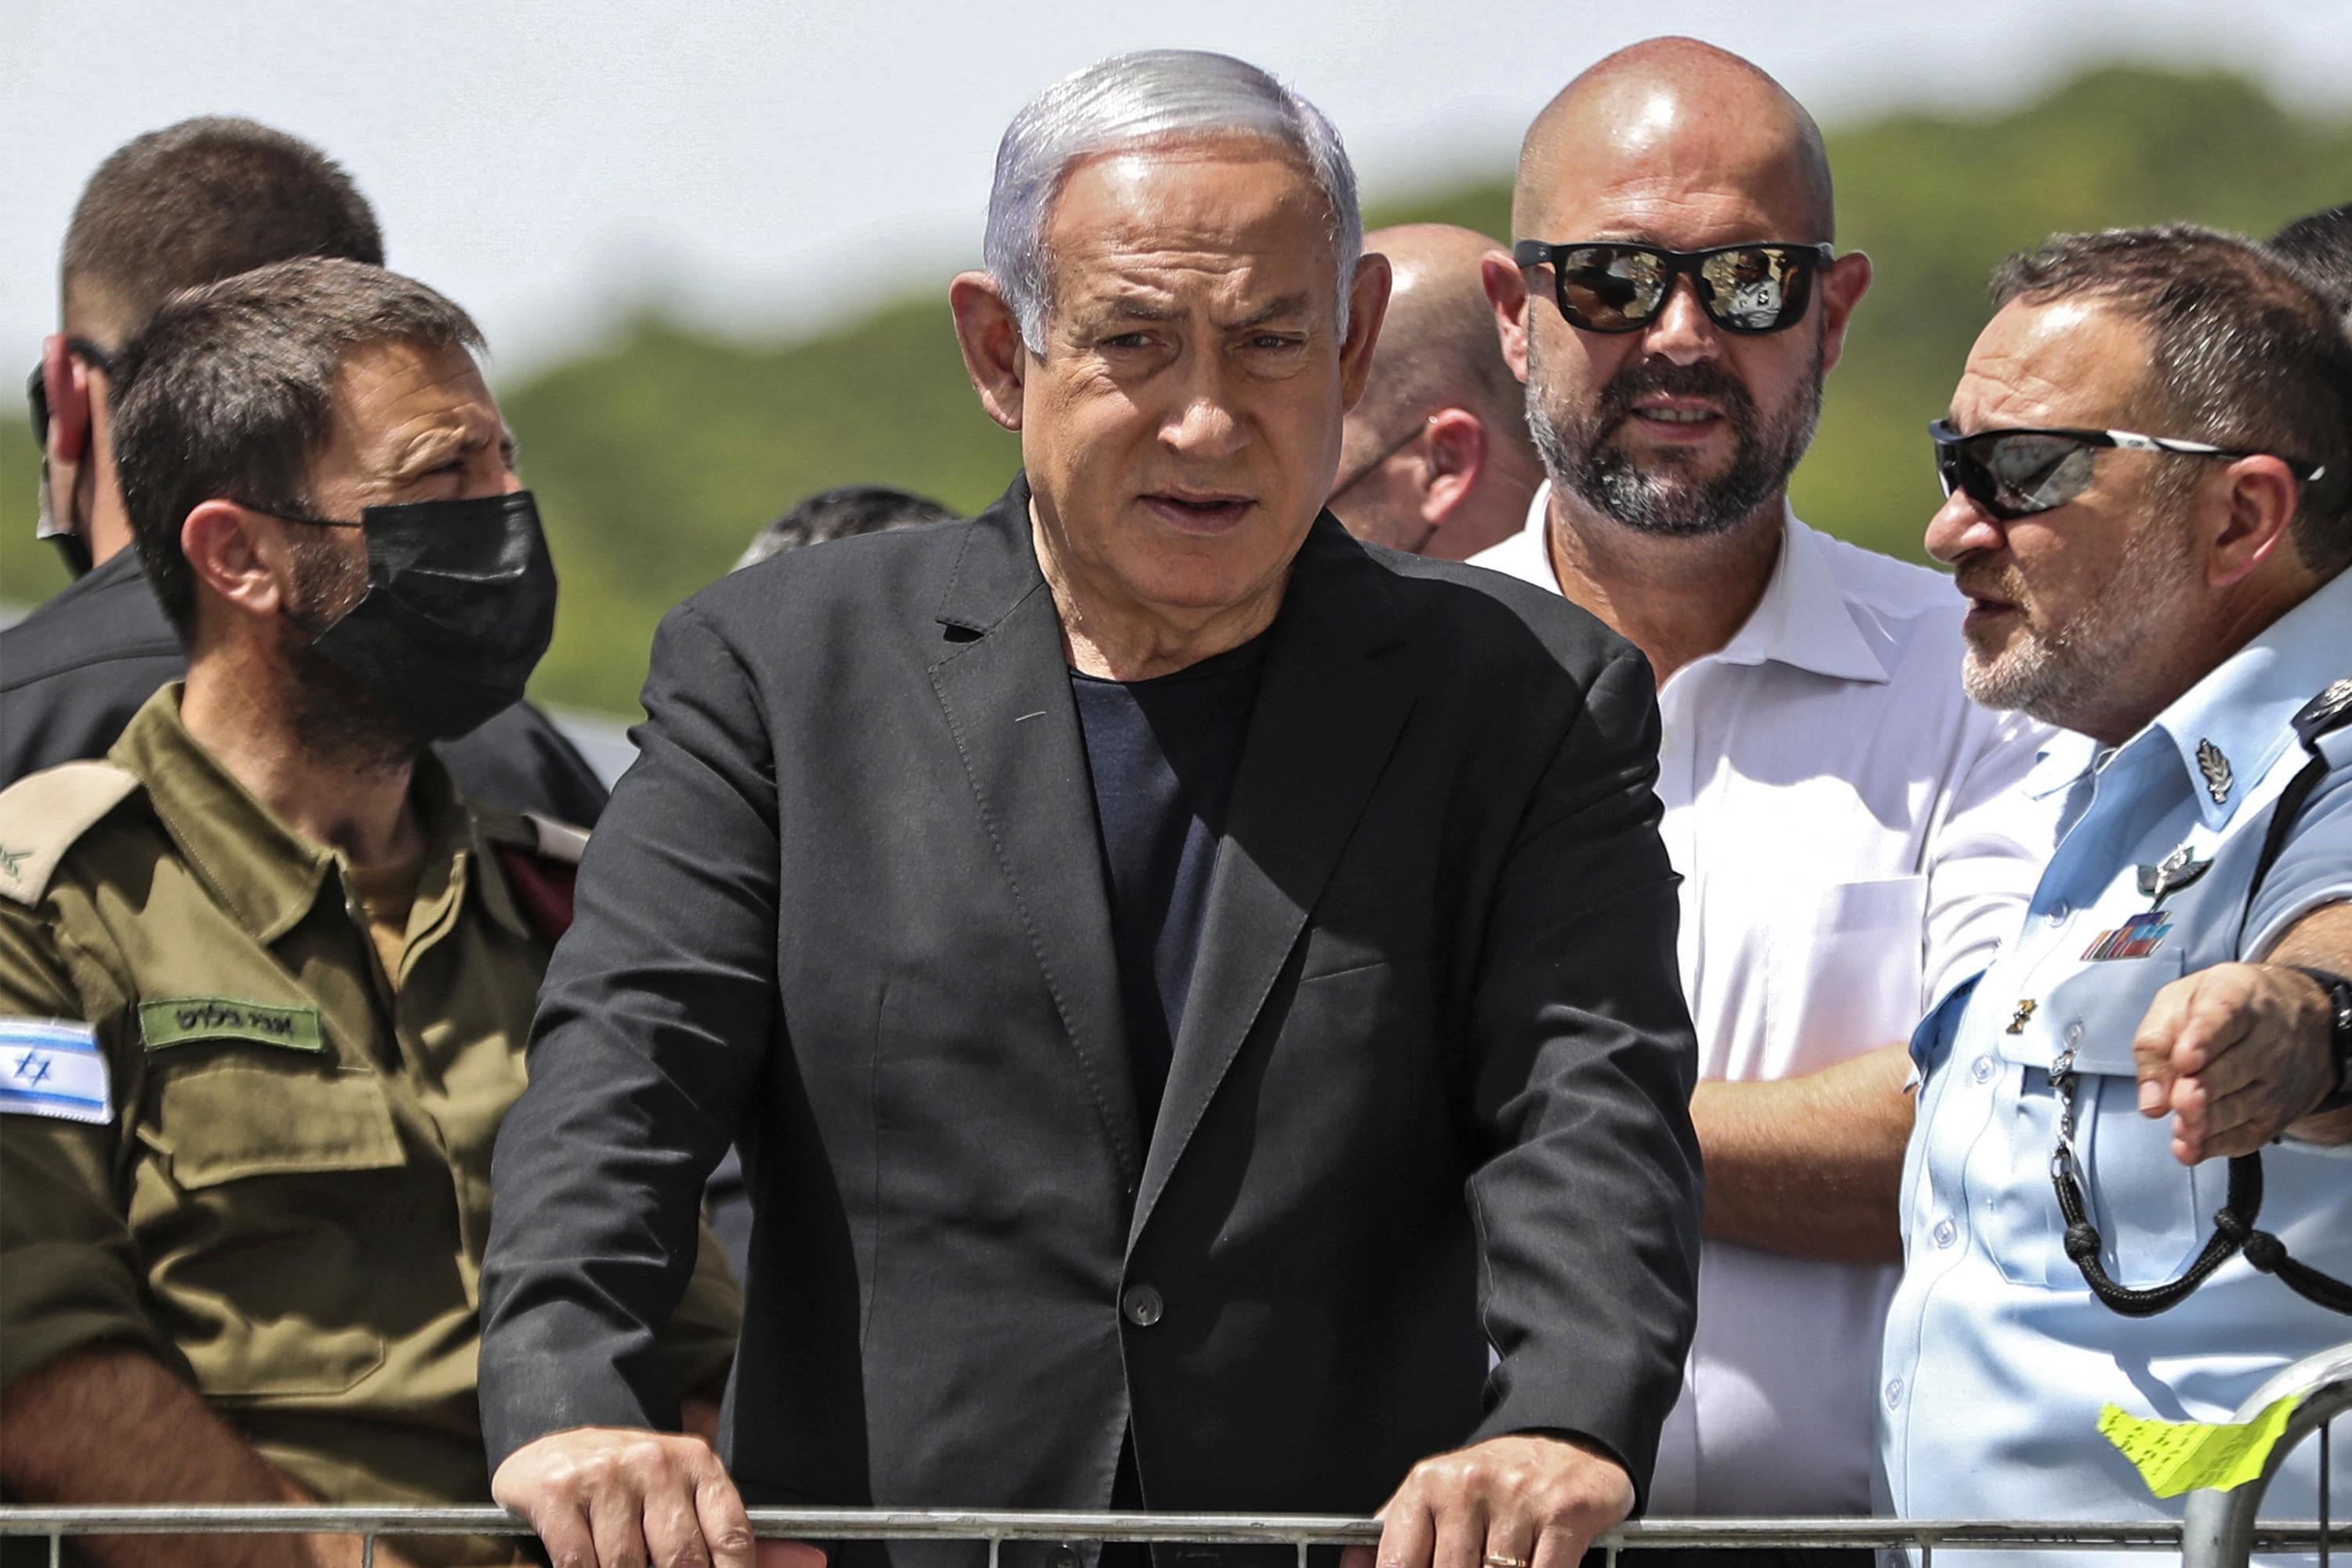 Israeli Prime Minister Benjamin Netanyahu visits the site of an overnight stampede during an ultra-Orthodox religious gathering in the northern Israeli town of Meron, on April 30, 2021. - The massive stampede at the densely-packed site near the reputed tomb of Rabbi Shimon Bar Yochai, a second-century Talmudic sage, where mainly ultra-Orthodox Jews flock to mark the Lag BaOmer holiday, killed at least 44 people in northern Israel, blackening the country's largest COVID-era gathering. (Photo by Ronen ZVULUN / POOL / AFP) (Photo by RONEN ZVULUN/POOL/AFP via Getty Images)